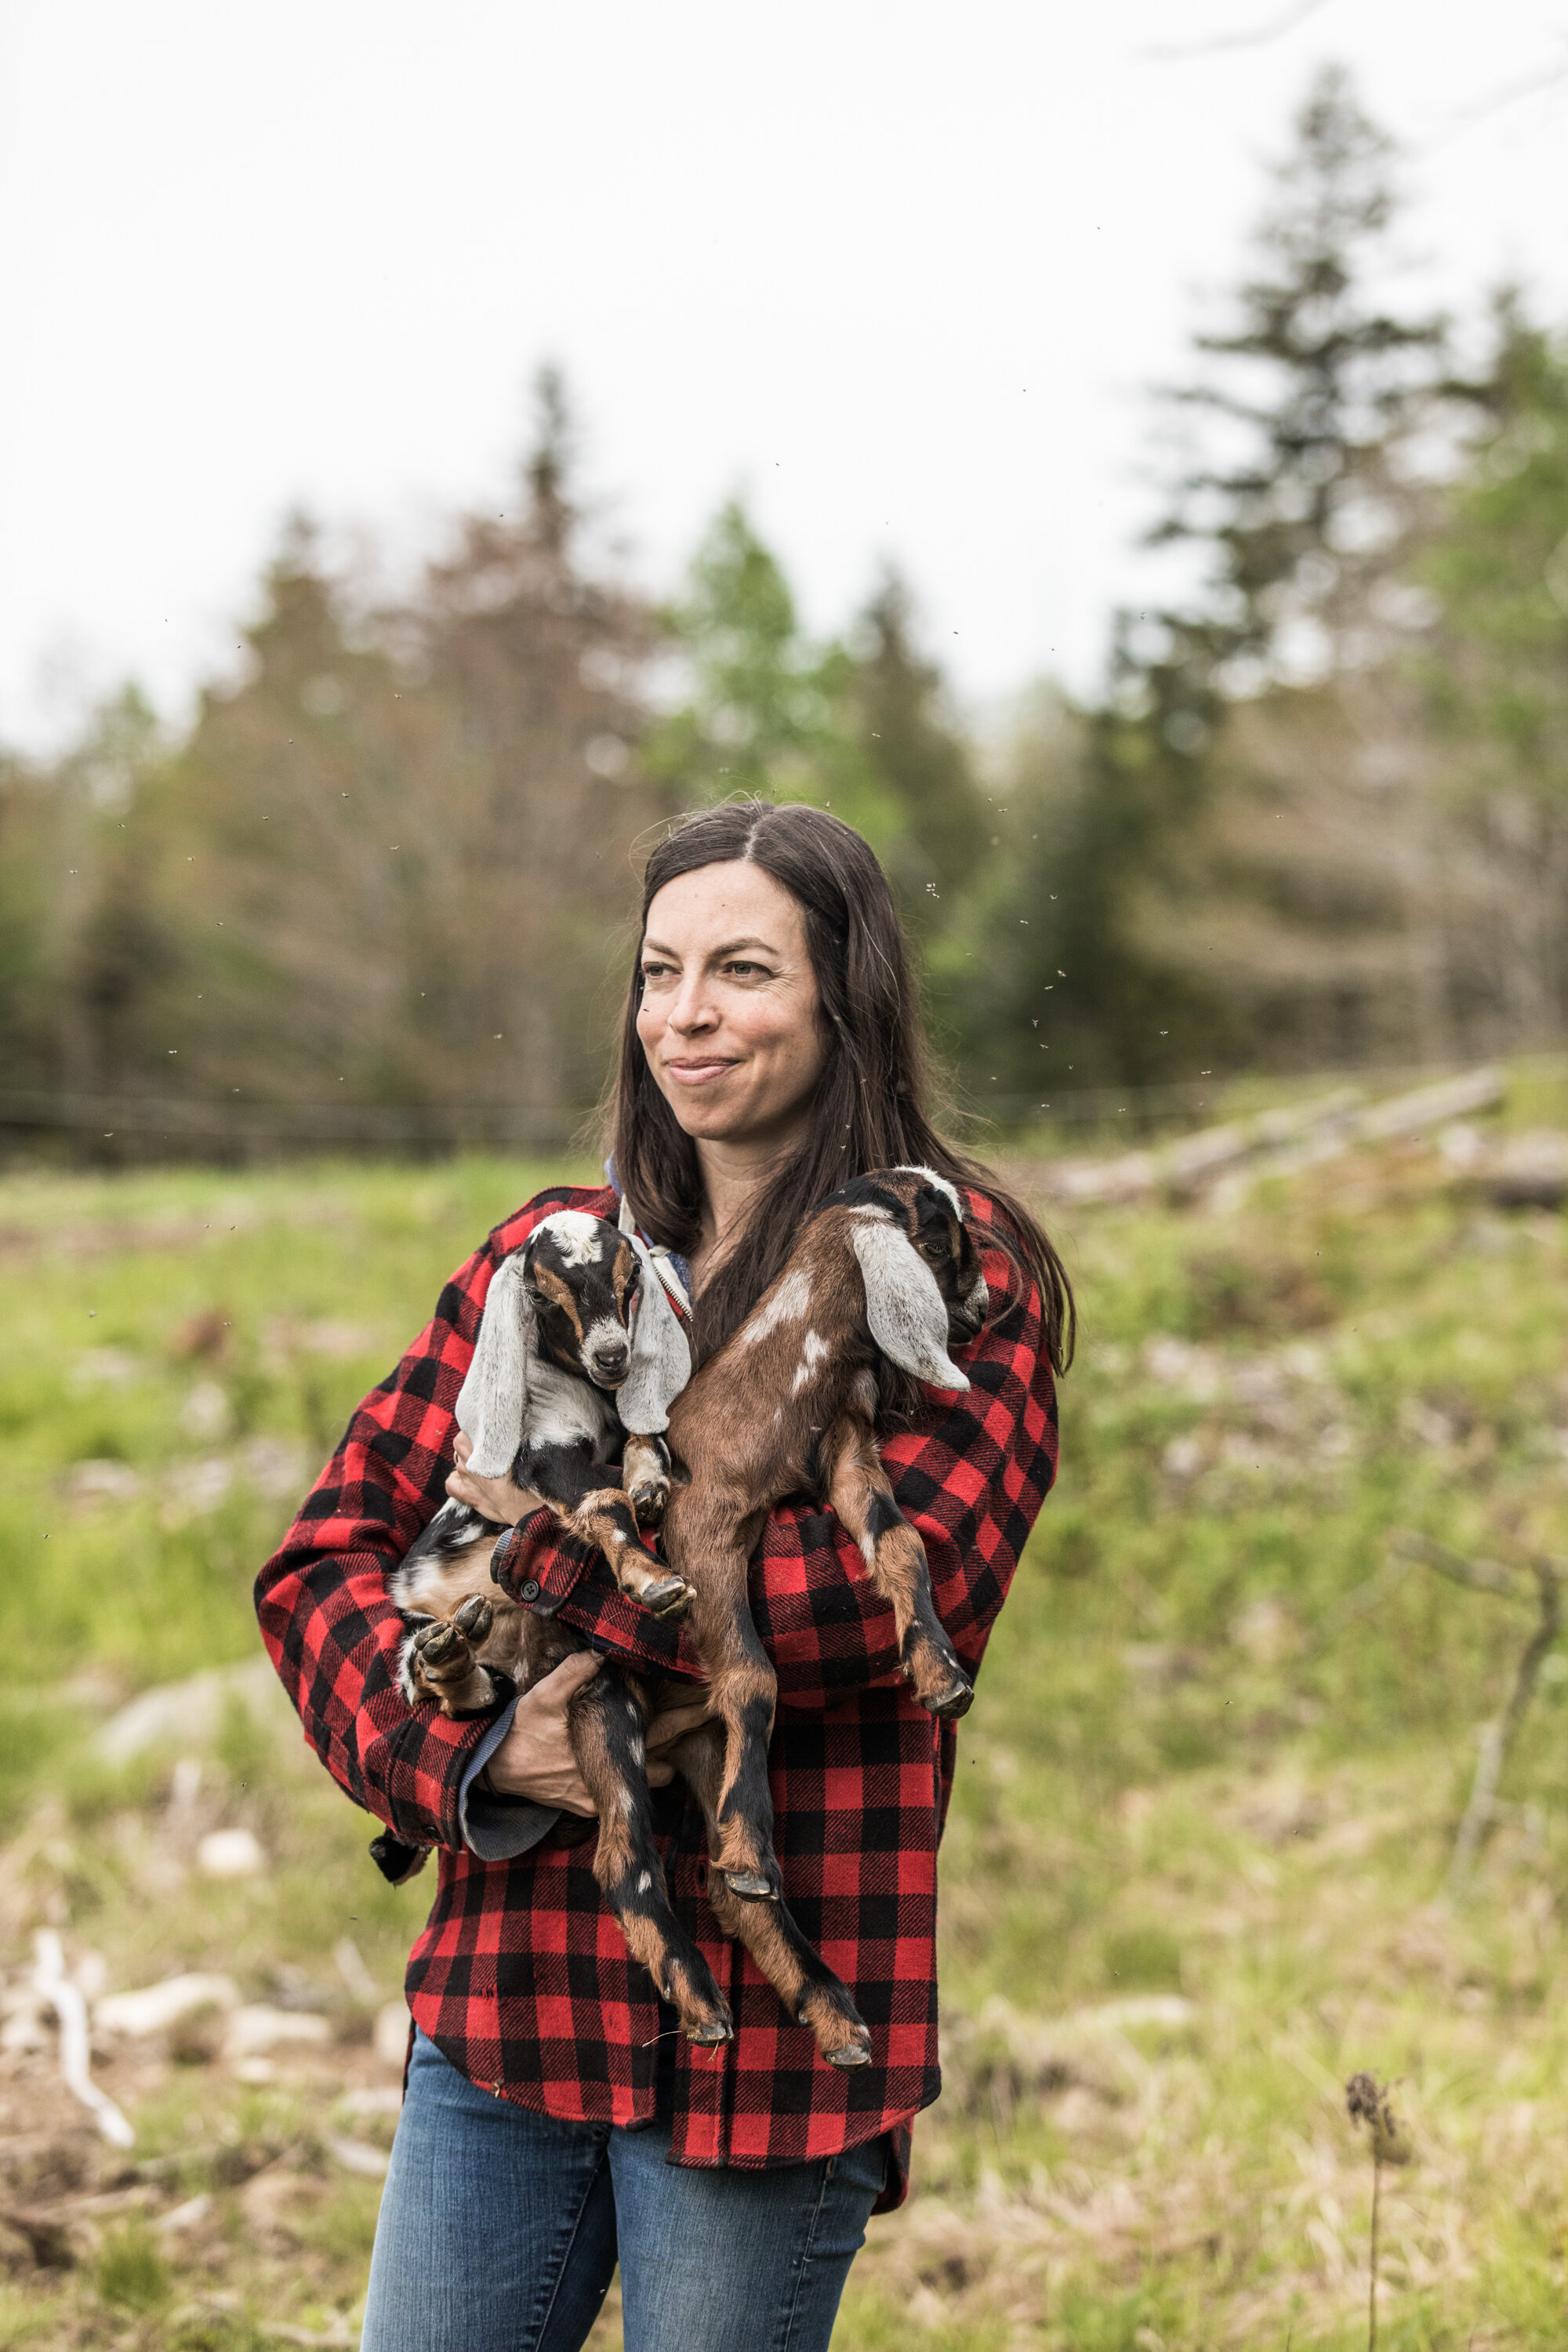   Rachel Bell, Tide Mill Creamery, Edmunds    “I feel like it's really easy to fall in and out of love with what I do depending on how hard my day has been. But always the goats make me fall in love with what I'm doing. Just being in their presence a